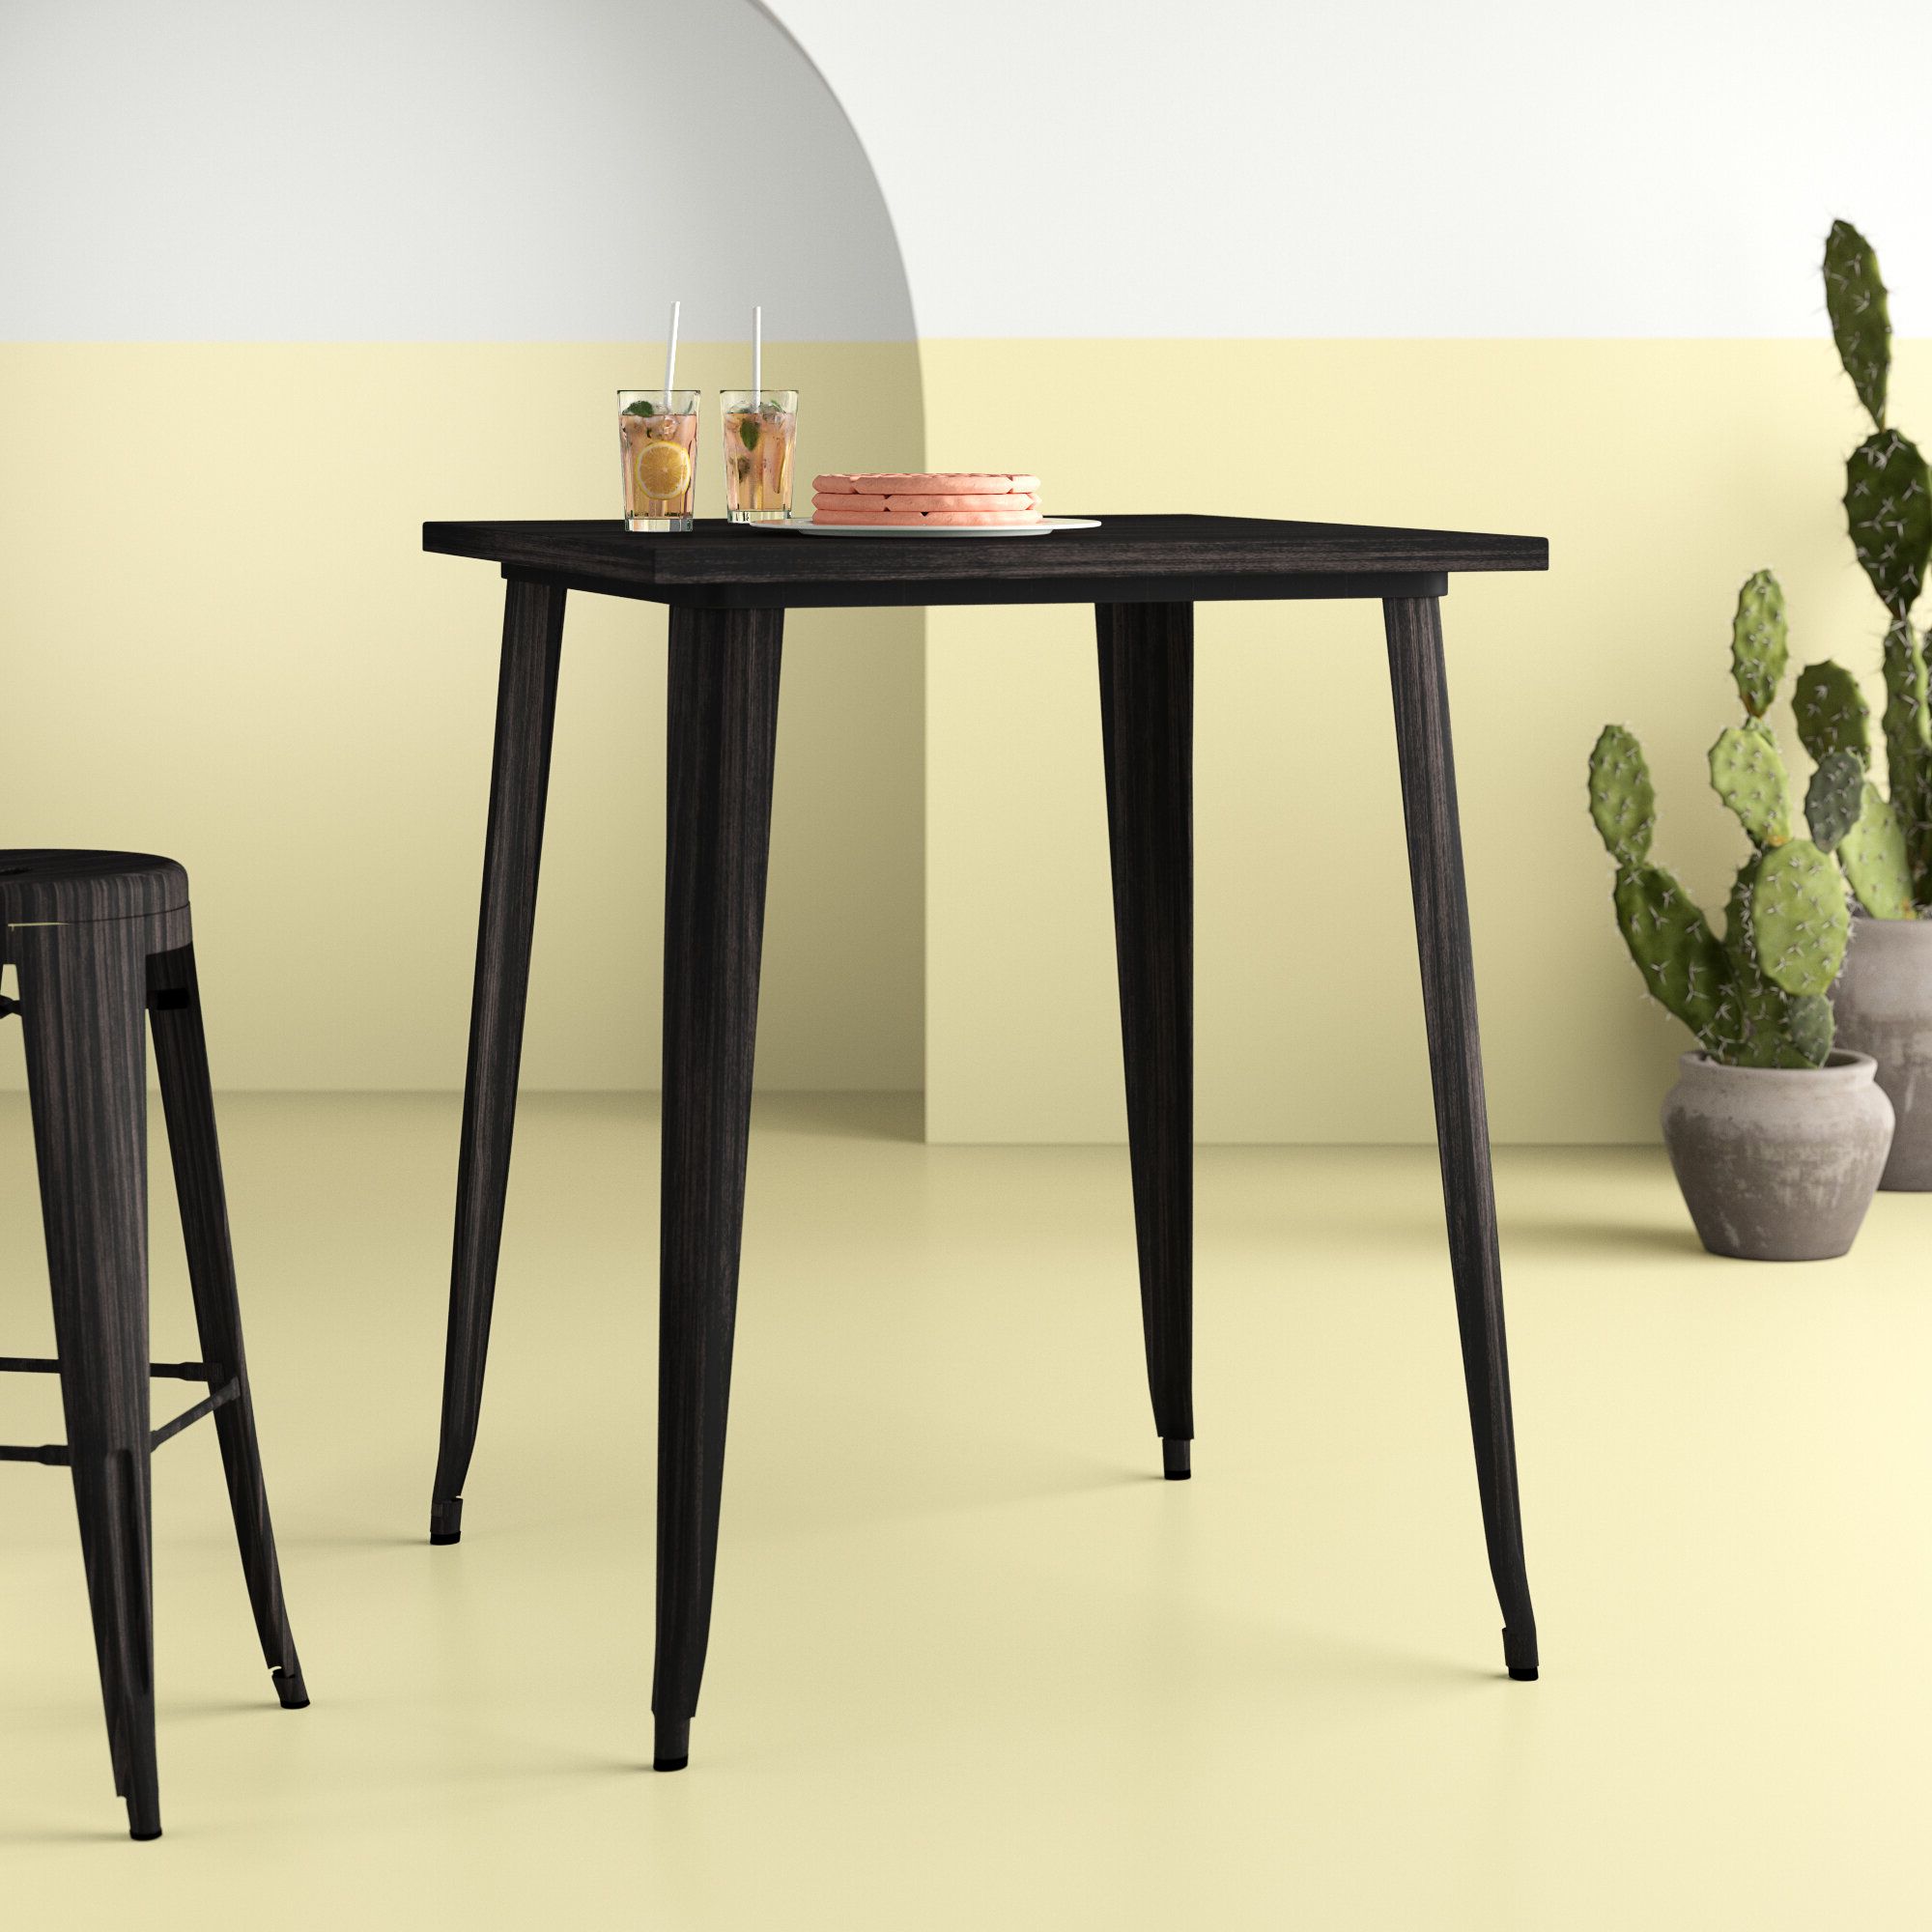 Outdoor Tall Bistro Table You'll Love In 2019 | Wayfair With Regard To Nadine Wood And Stainless Steel Buffets (Gallery 17 of 20)